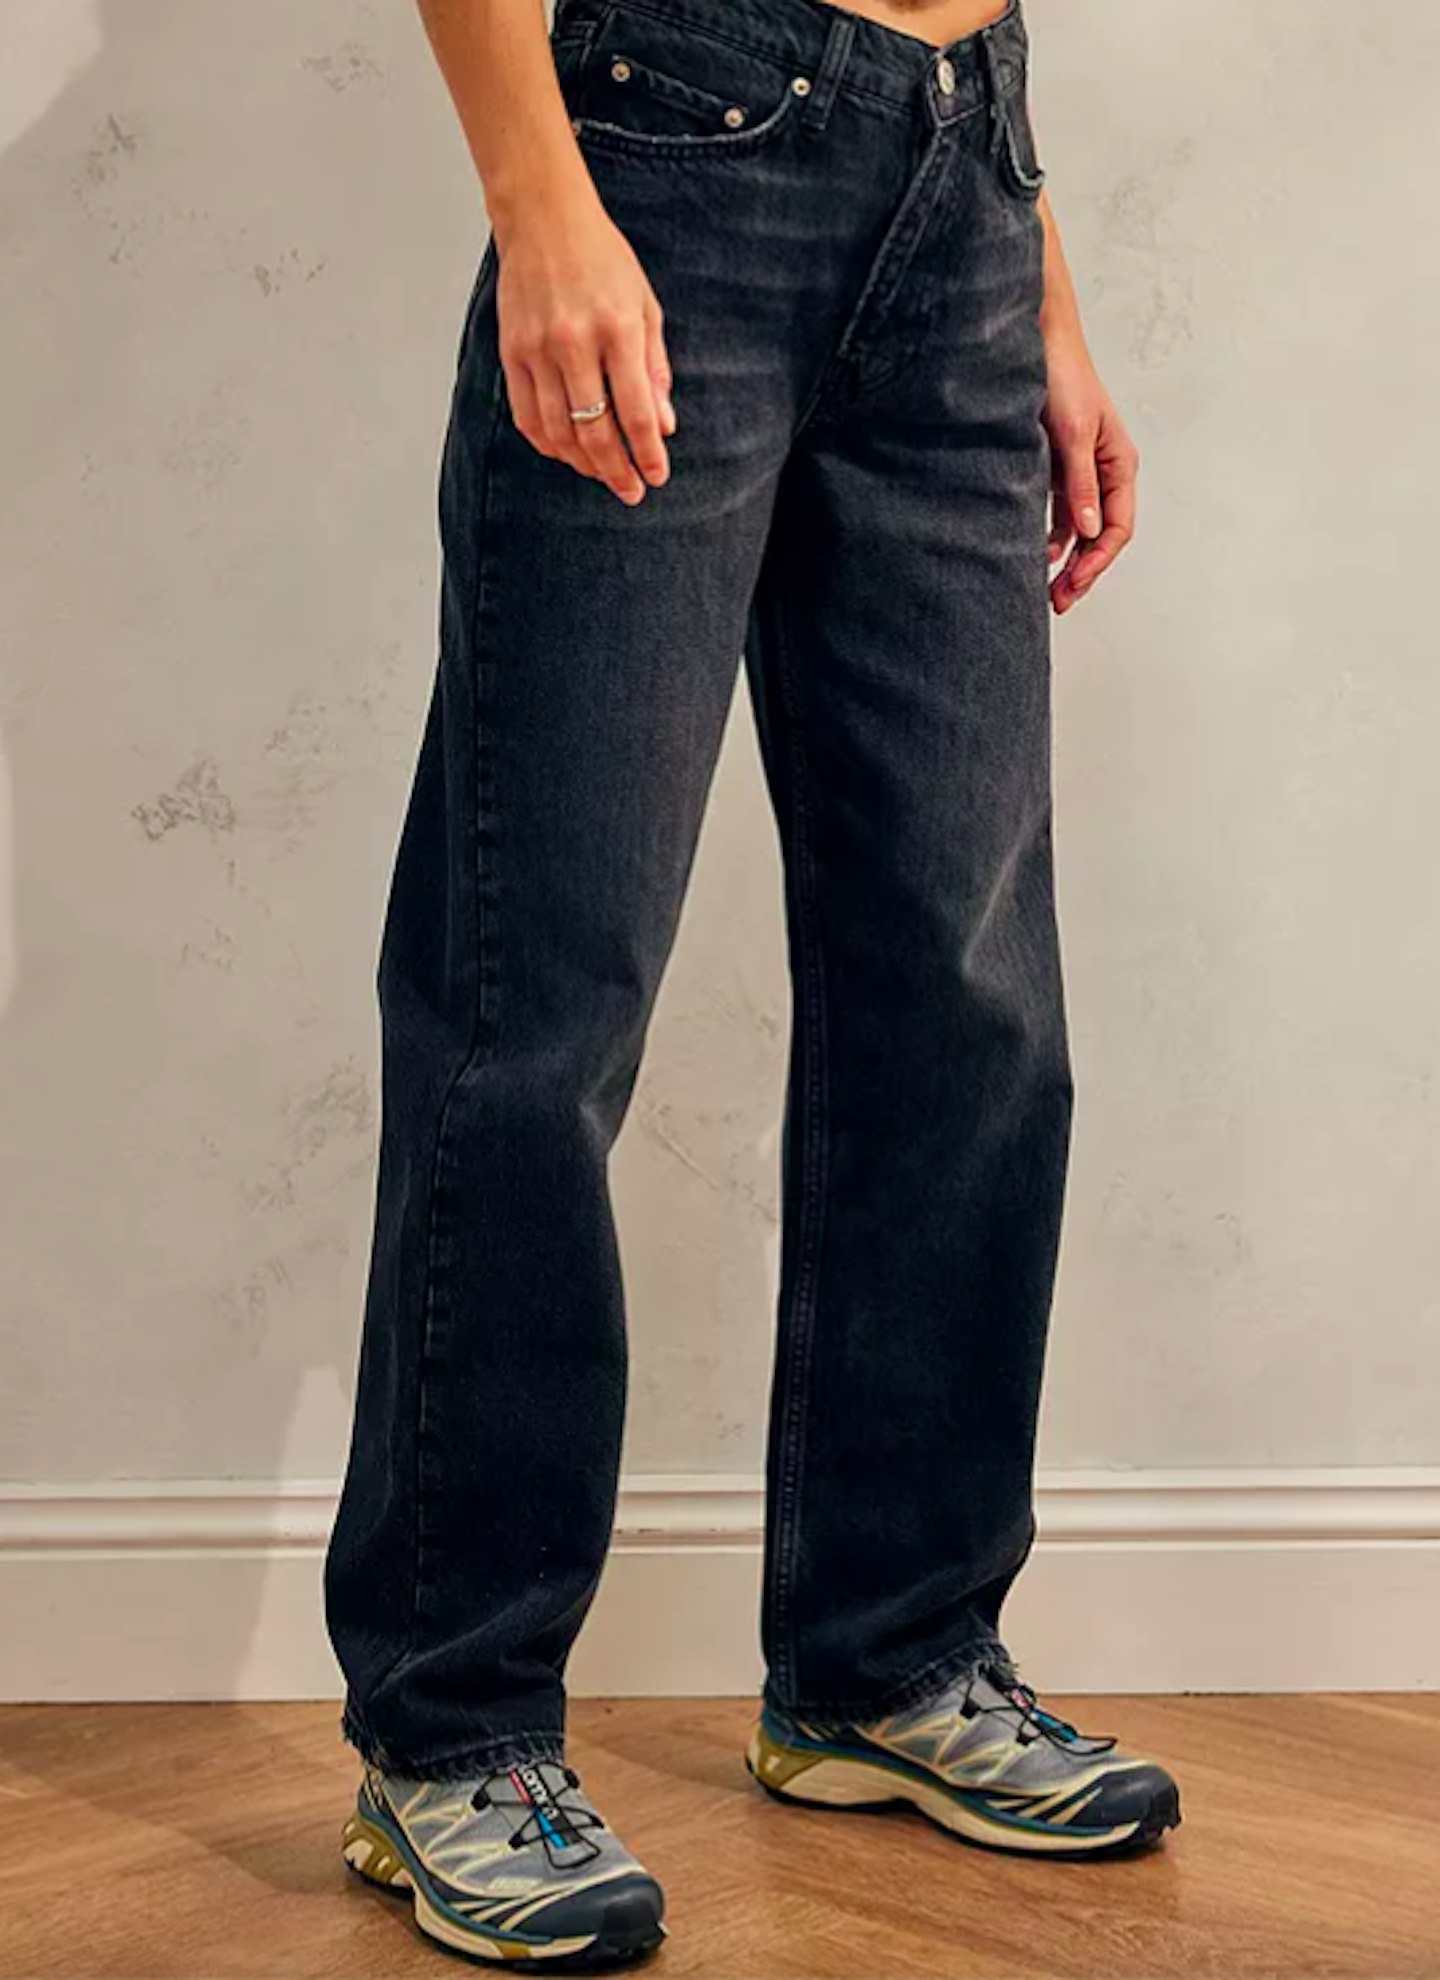 Urban Outfitters, BDG Black Authentic Straight Leg Jeans